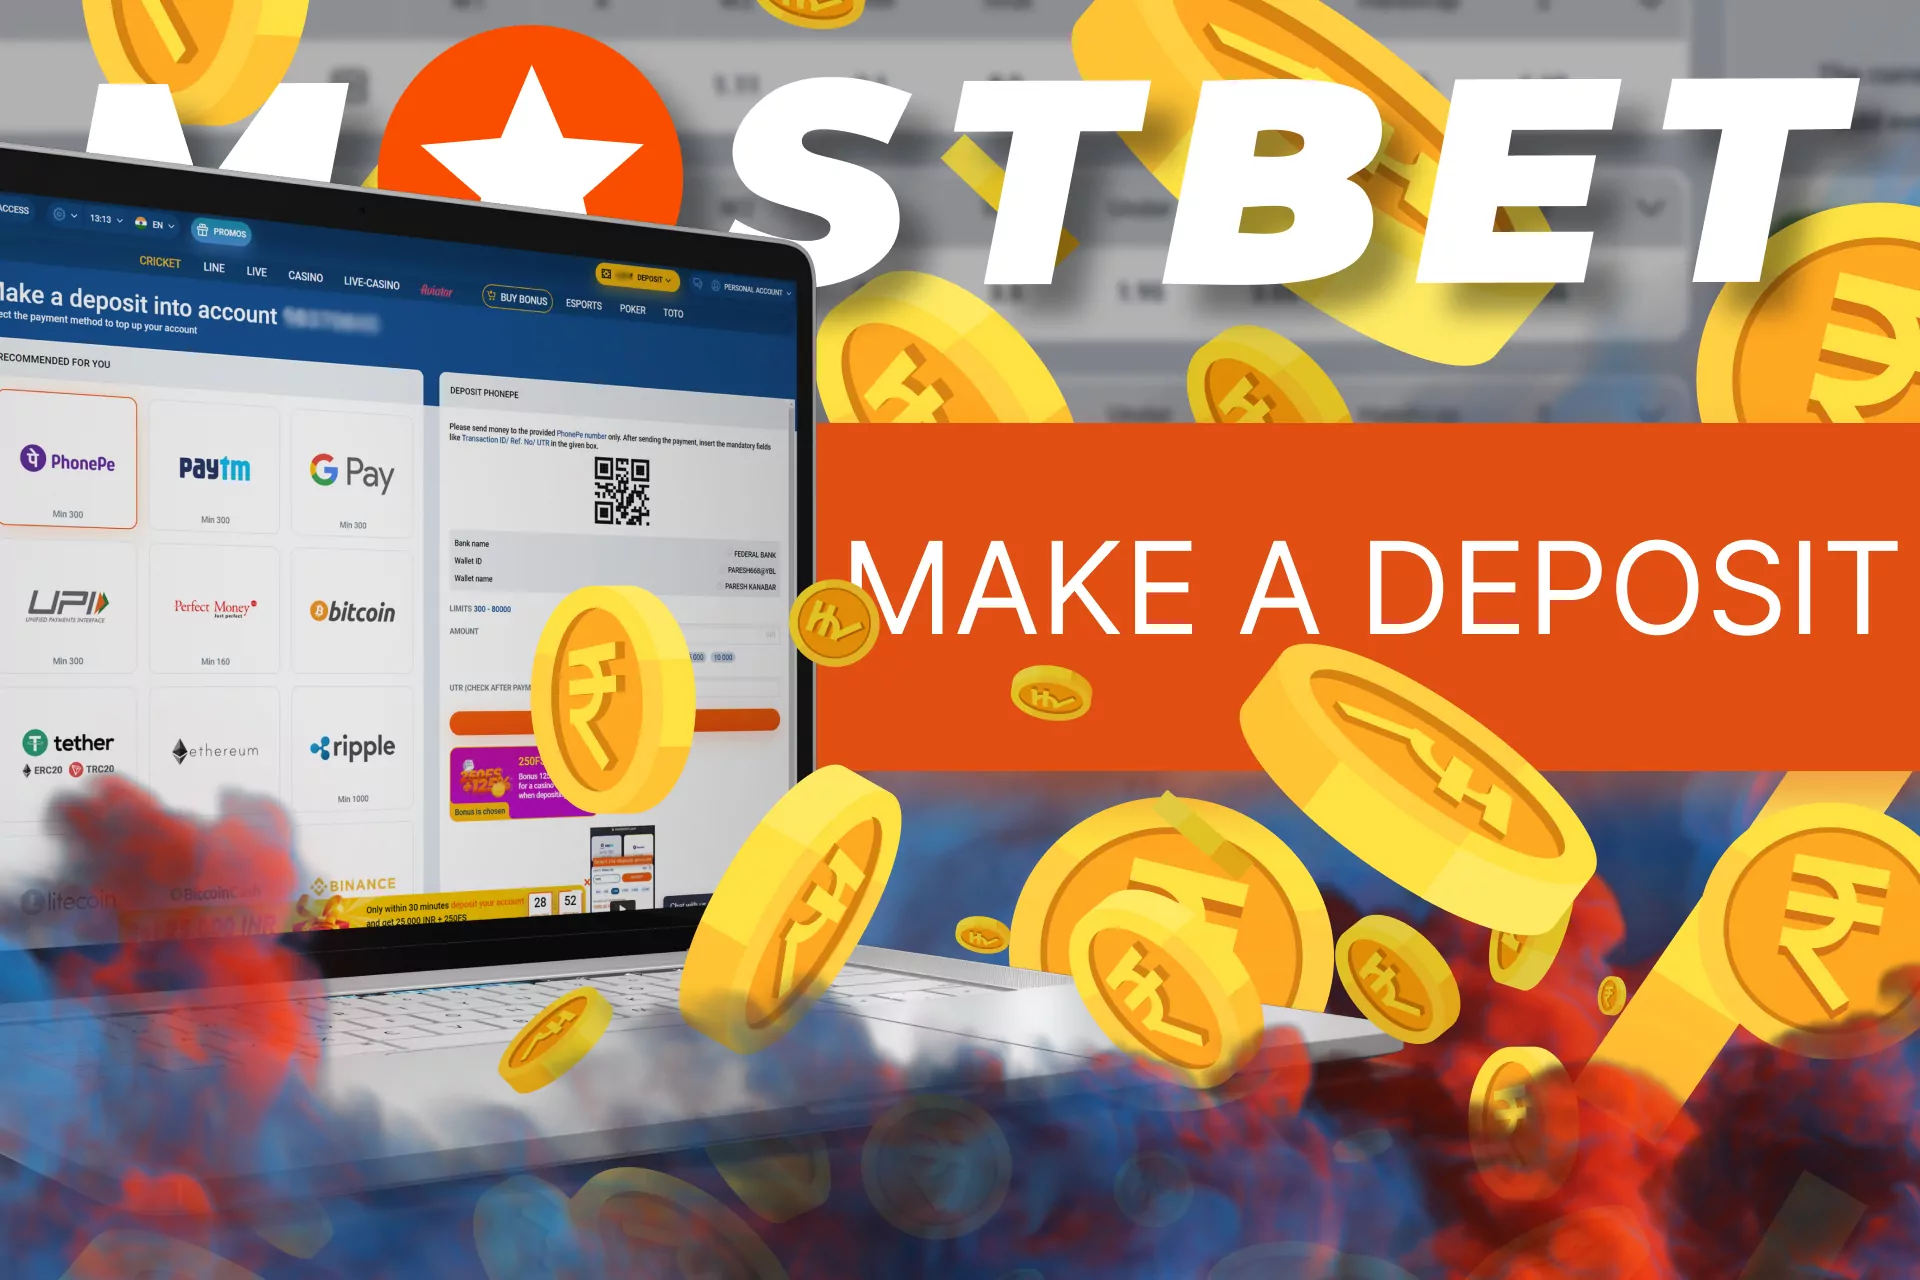 Find out how you can easily deposit your account at Mostbet online.